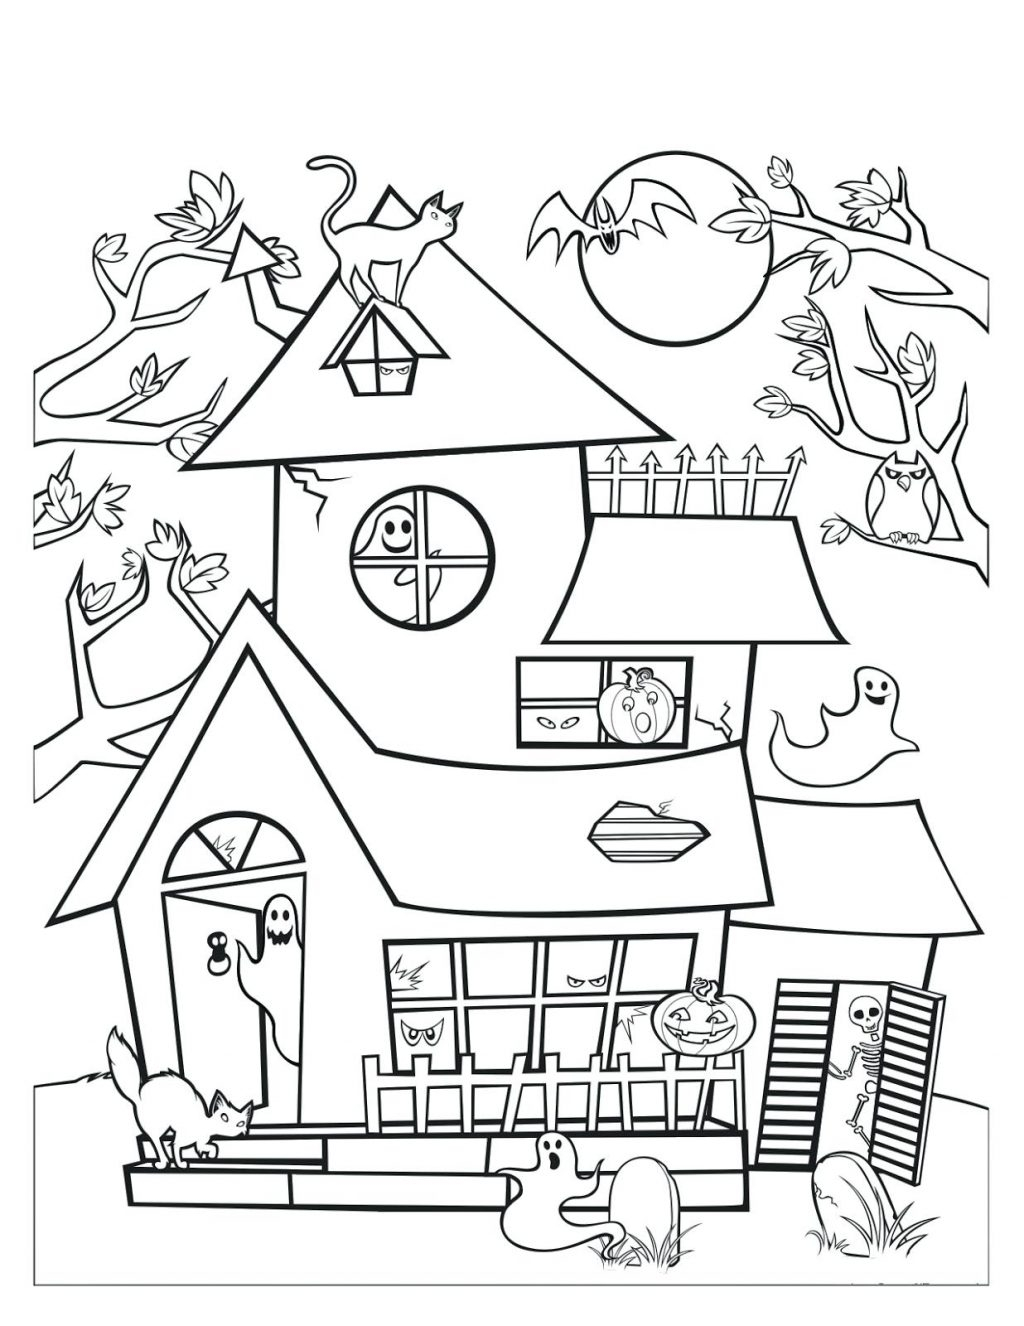 Best Photo of Mansion Coloring Pages - vicoms.info